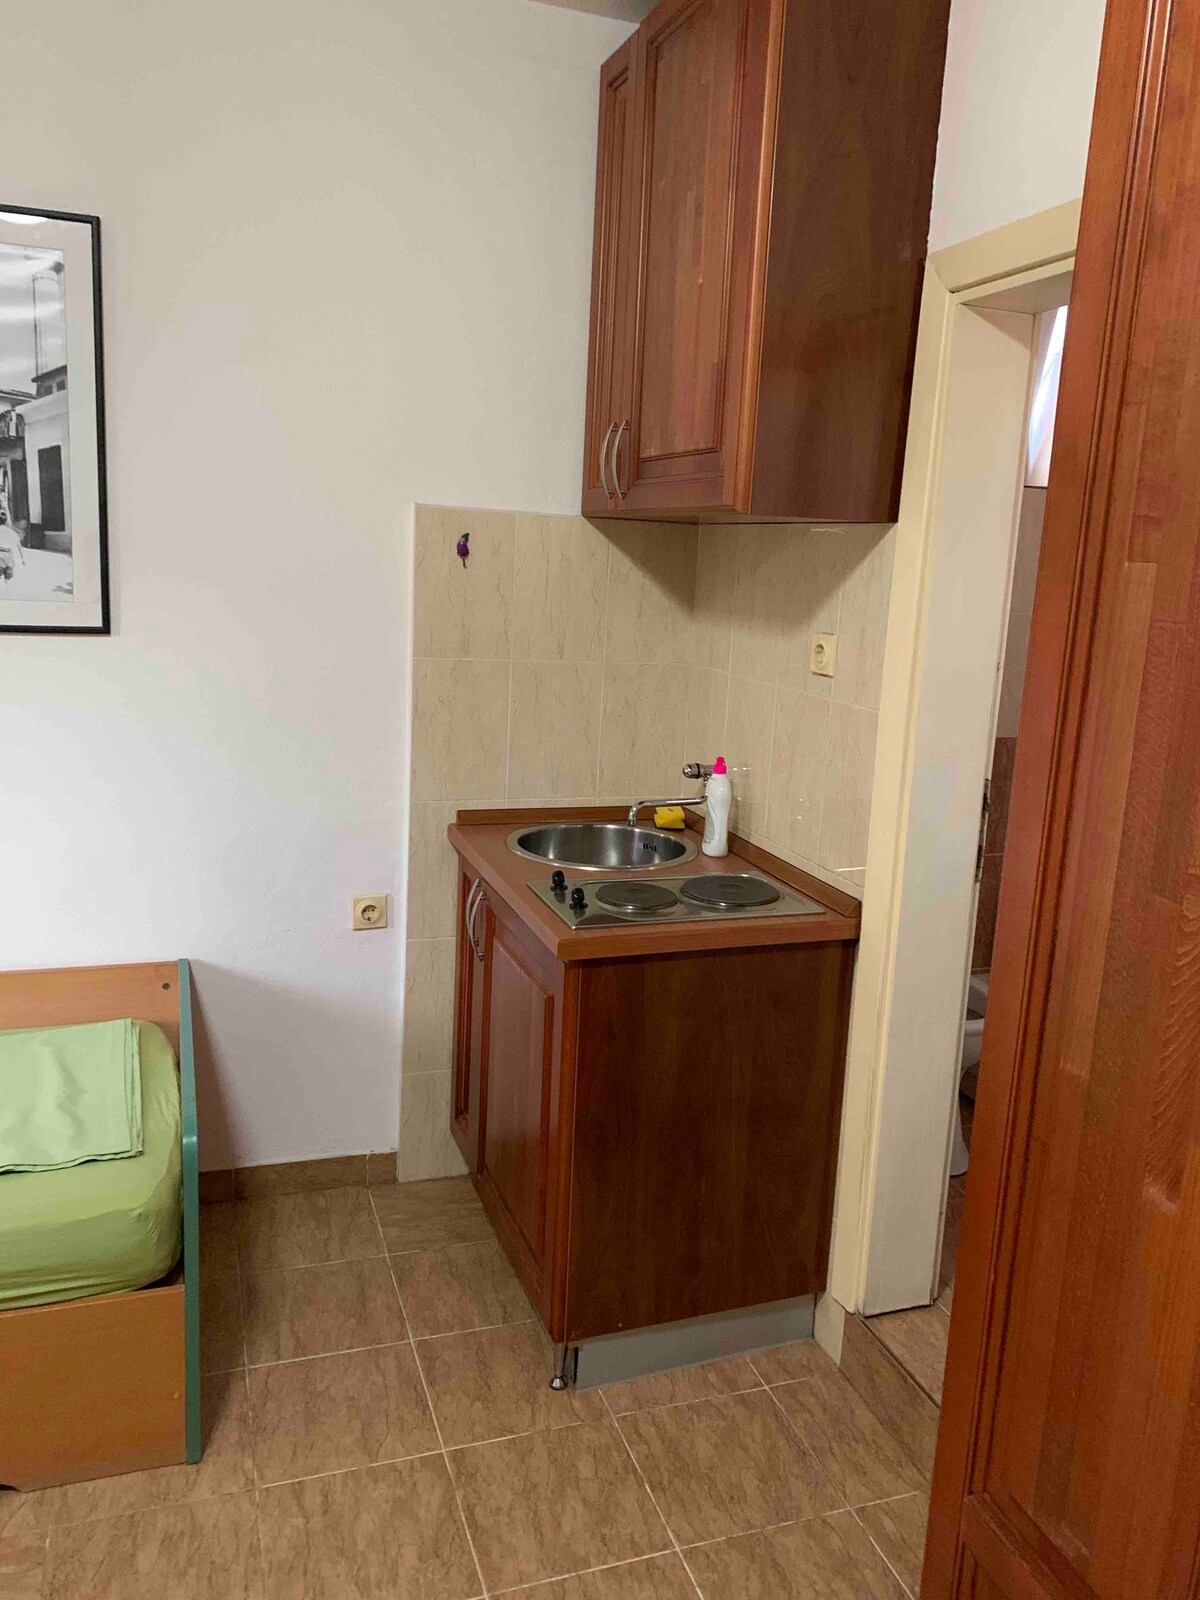 Accessible City Center Accommodation